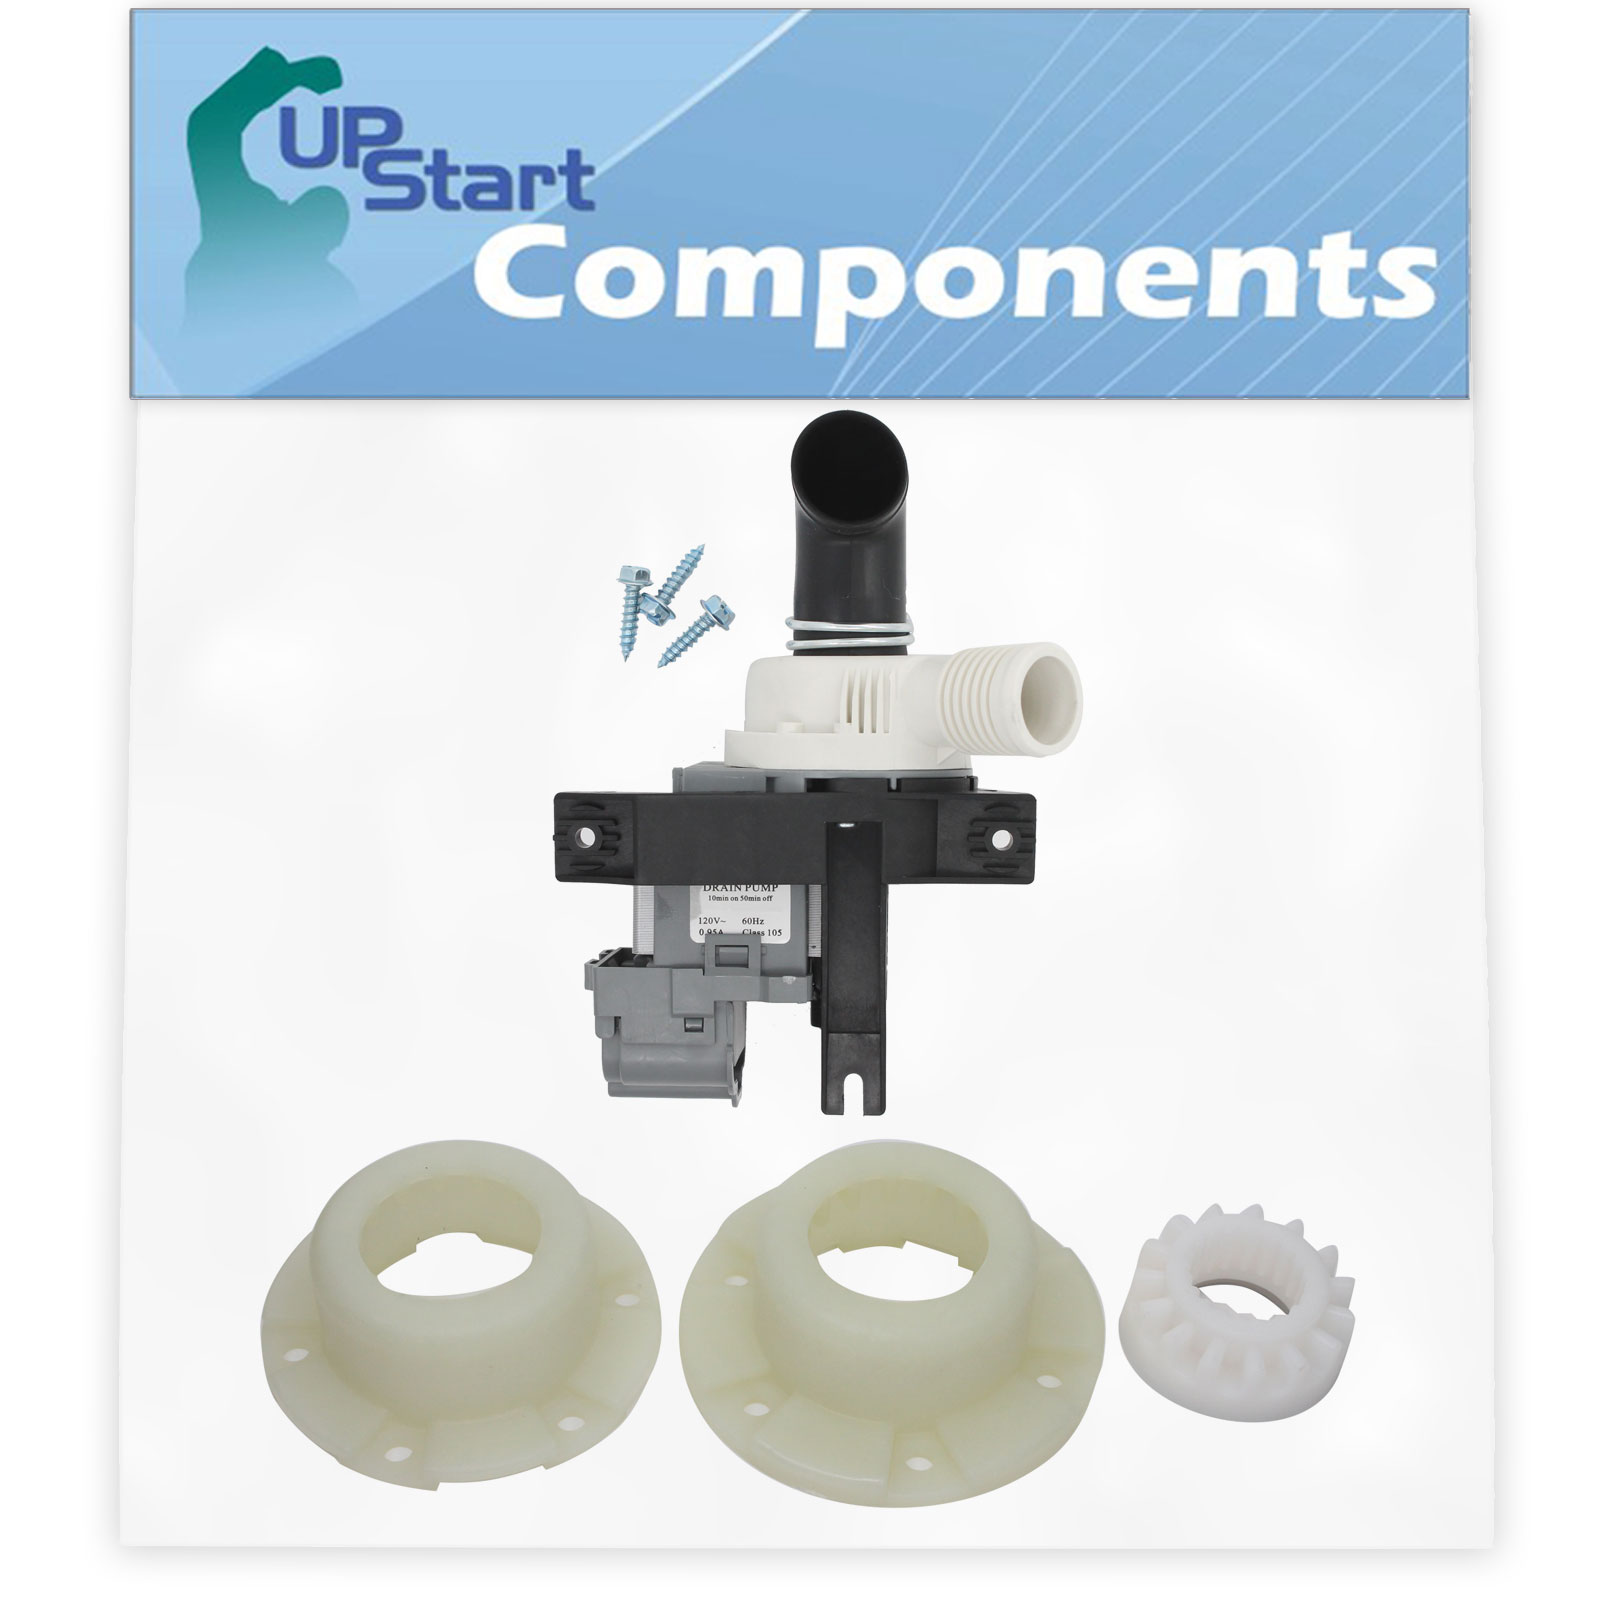 W10536347 Washer Drain Pump & 280145 Hub Kit Replacement for Kenmore / Sears 11027052602 Washing Machine - Compatible with W10217134 Water Pump & W10820039 Basket Hub Kit - UpStart Components Brand - image 1 of 4